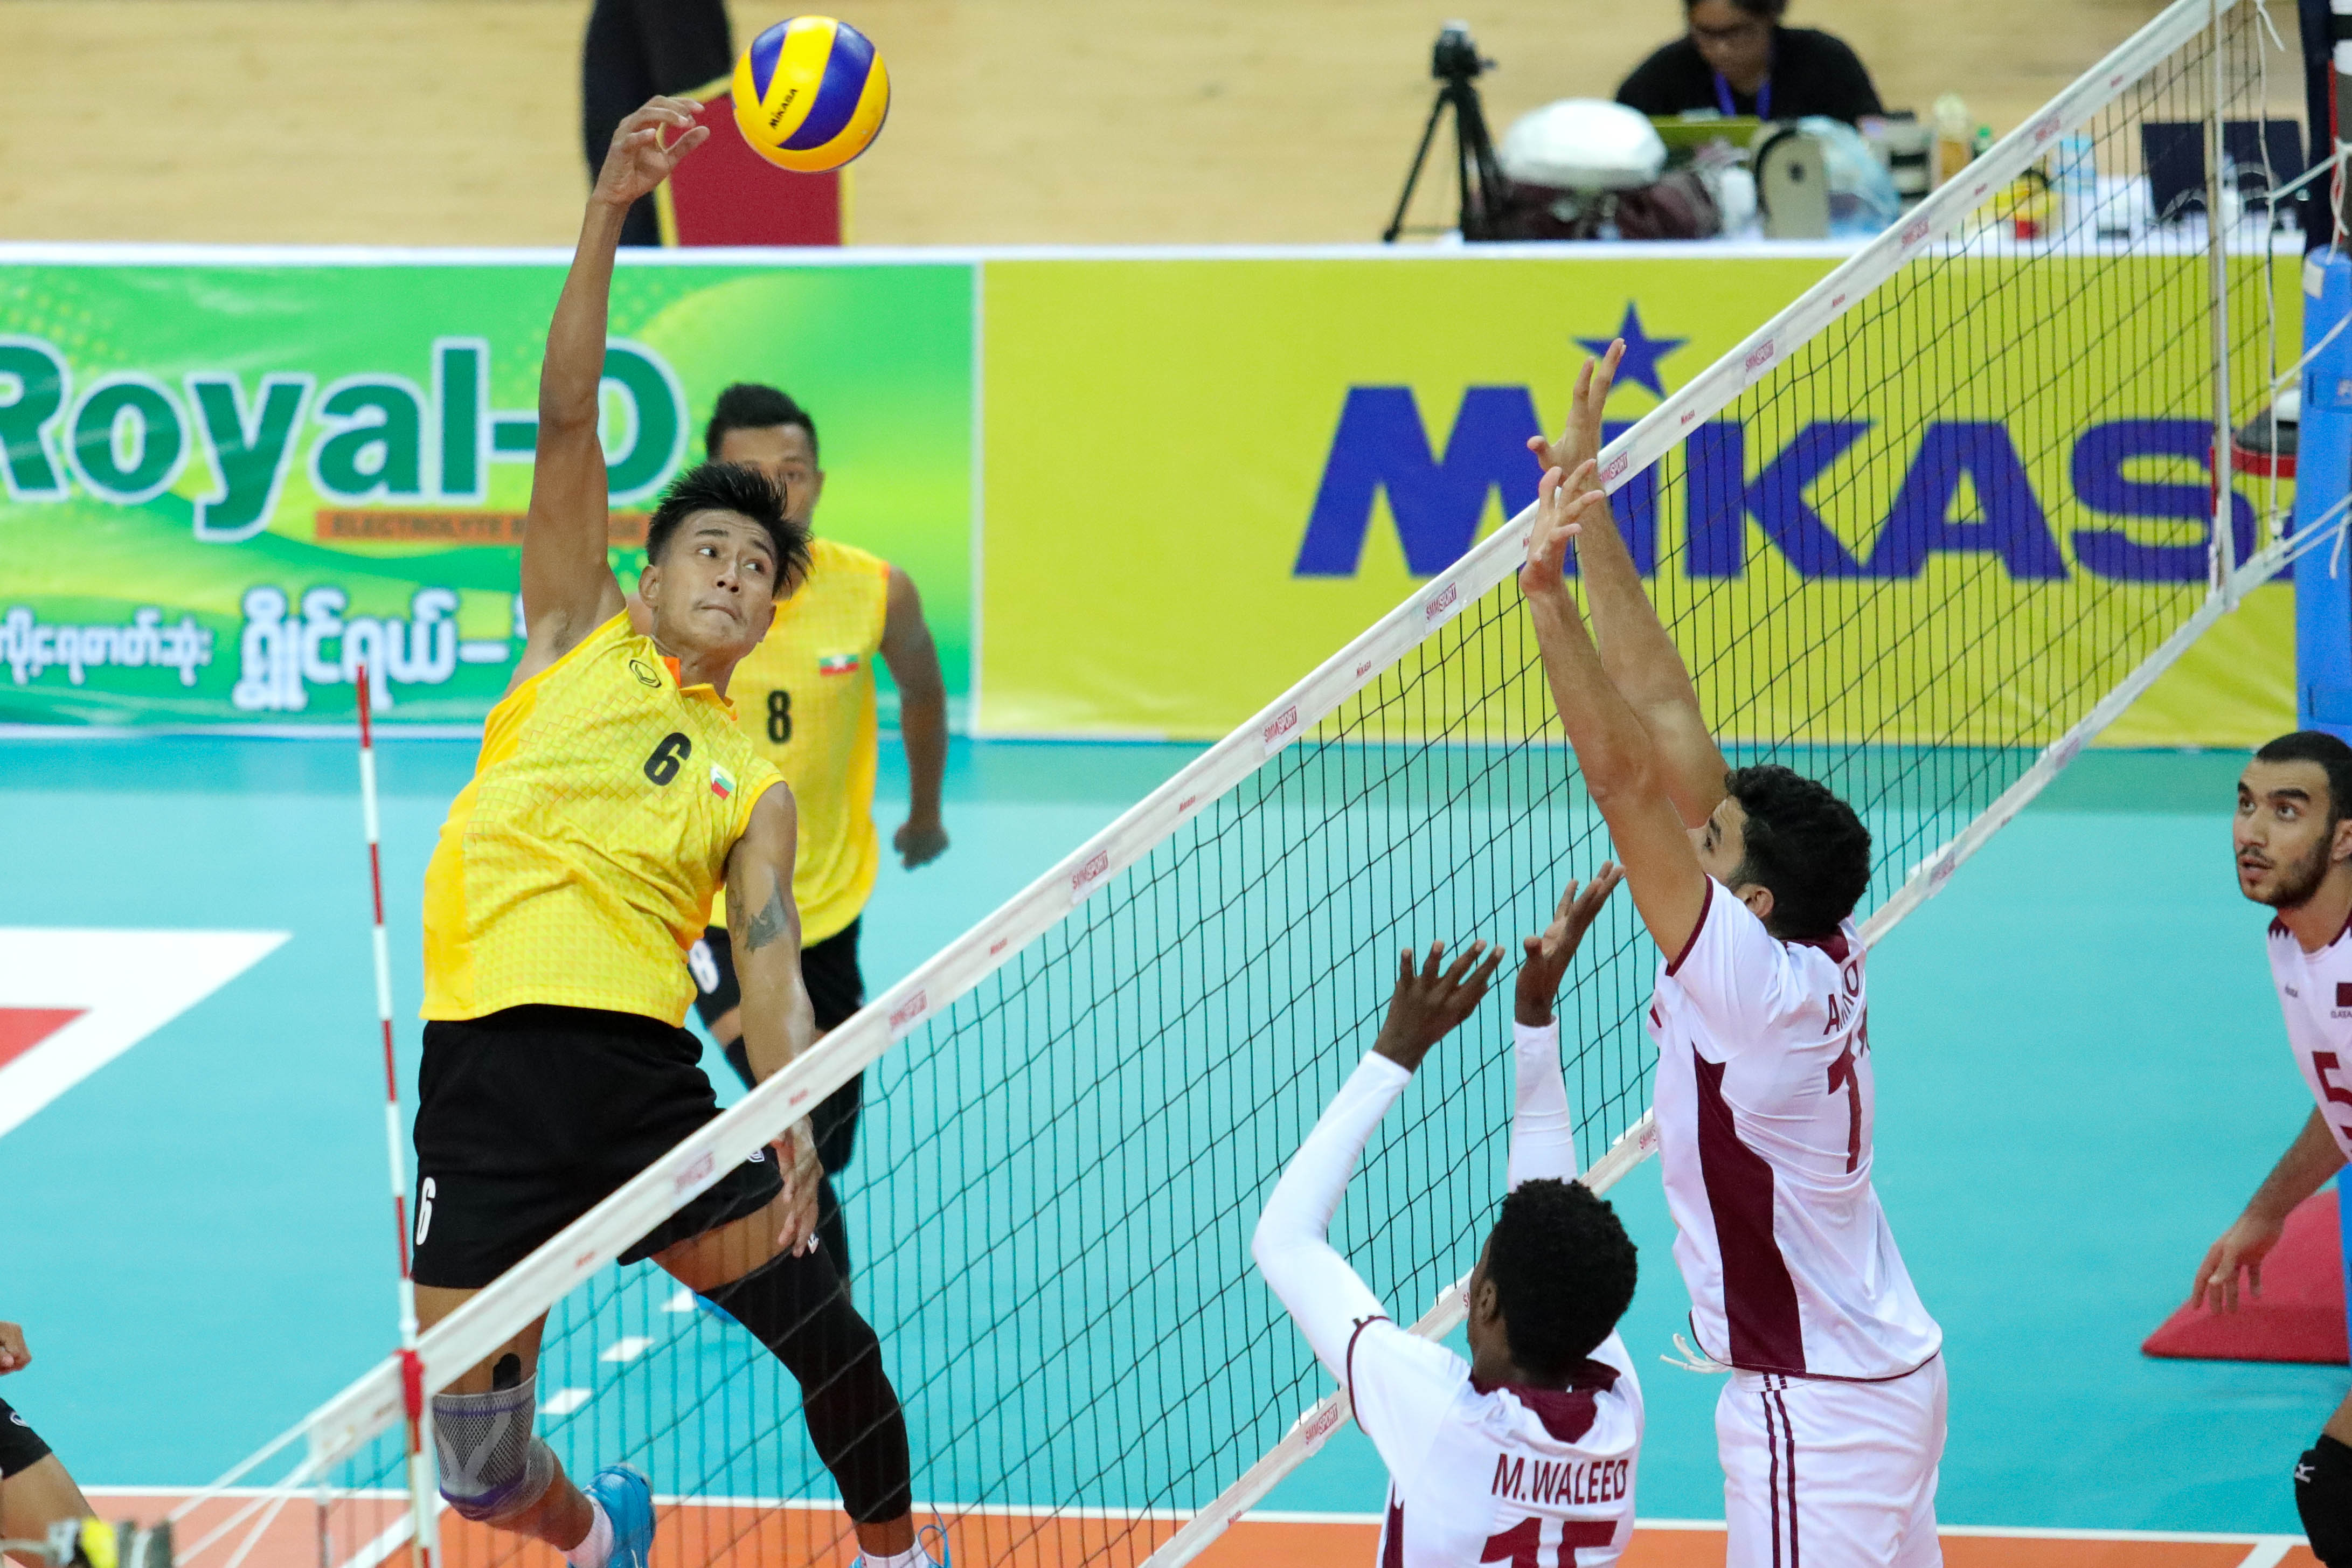 AUNG ZAW HTET POWERS MYANMAR TO COMEBACK 3-1 WIN AGAINST QATAR